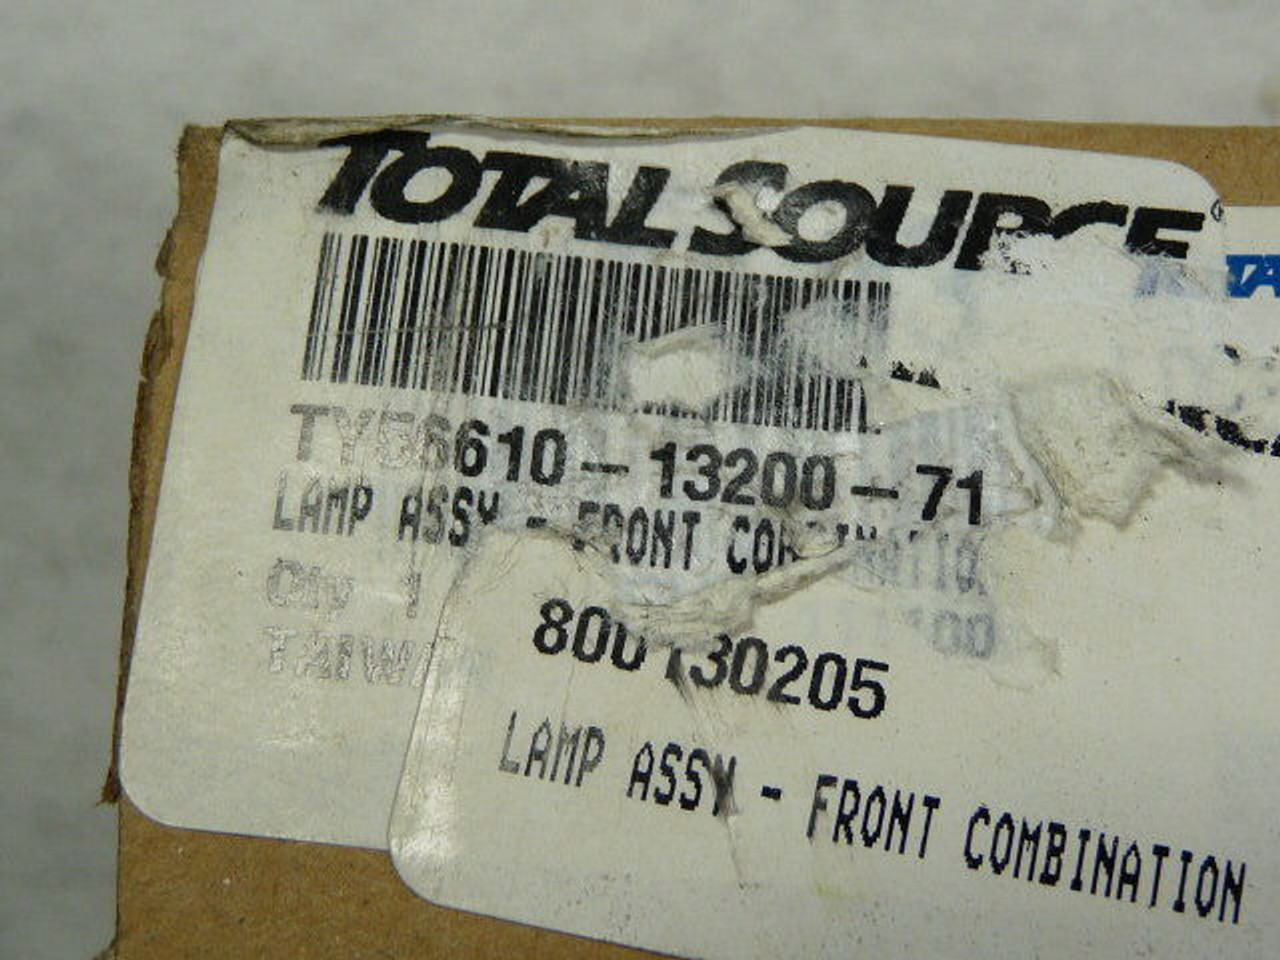 TotalSource TY56610-13200-71 Fork Lift Front Combination Light Assembly ! NEW !